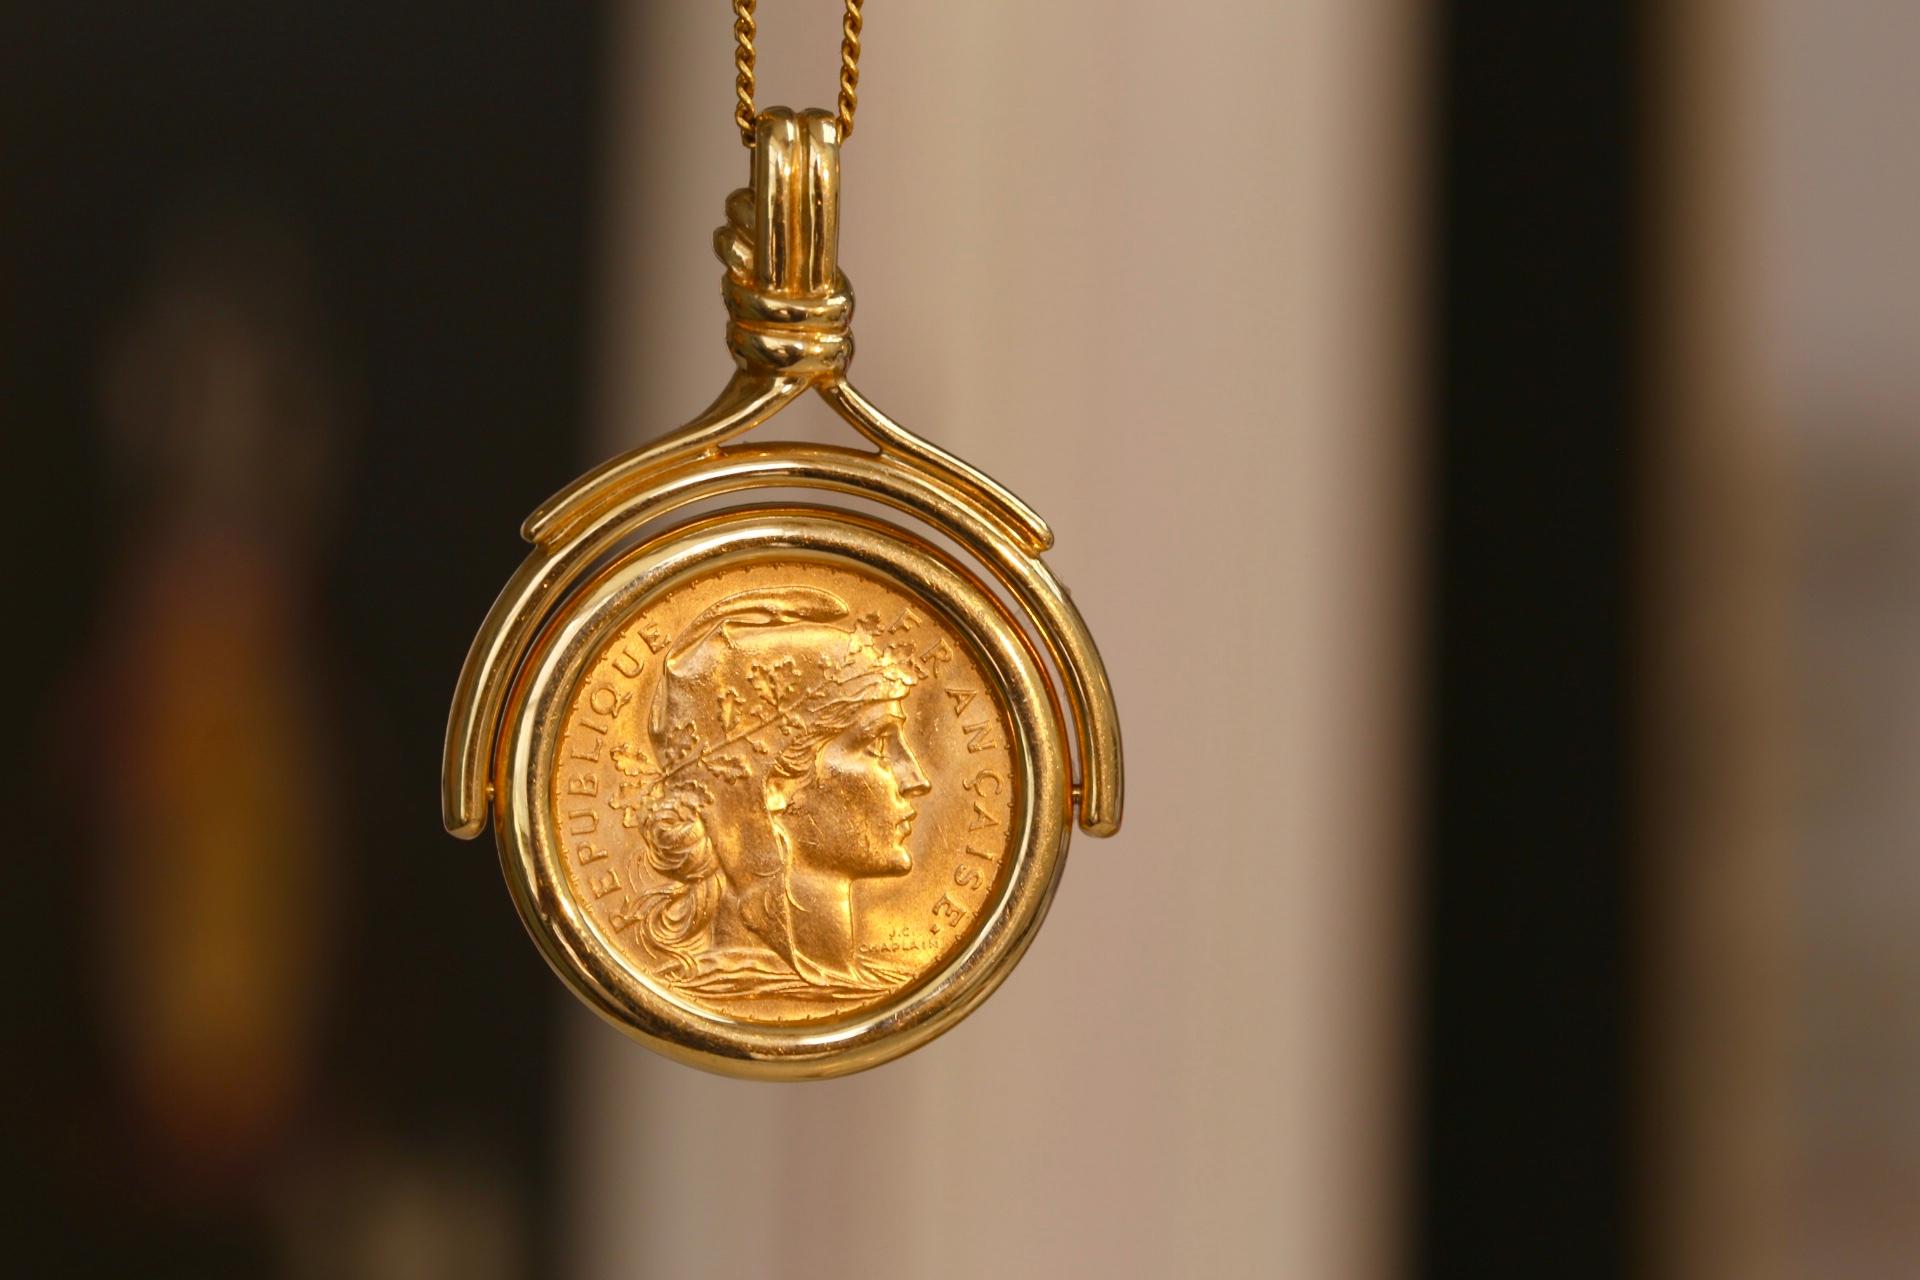 This intriguing pendant necklace brings the focus to the 20 Franc Marianne Rooster coin from 1912. It is set so that it can spin on its axis to reveal which side you want. Either Marianne, a symbol of the French Republic, or the Gallic rooster can